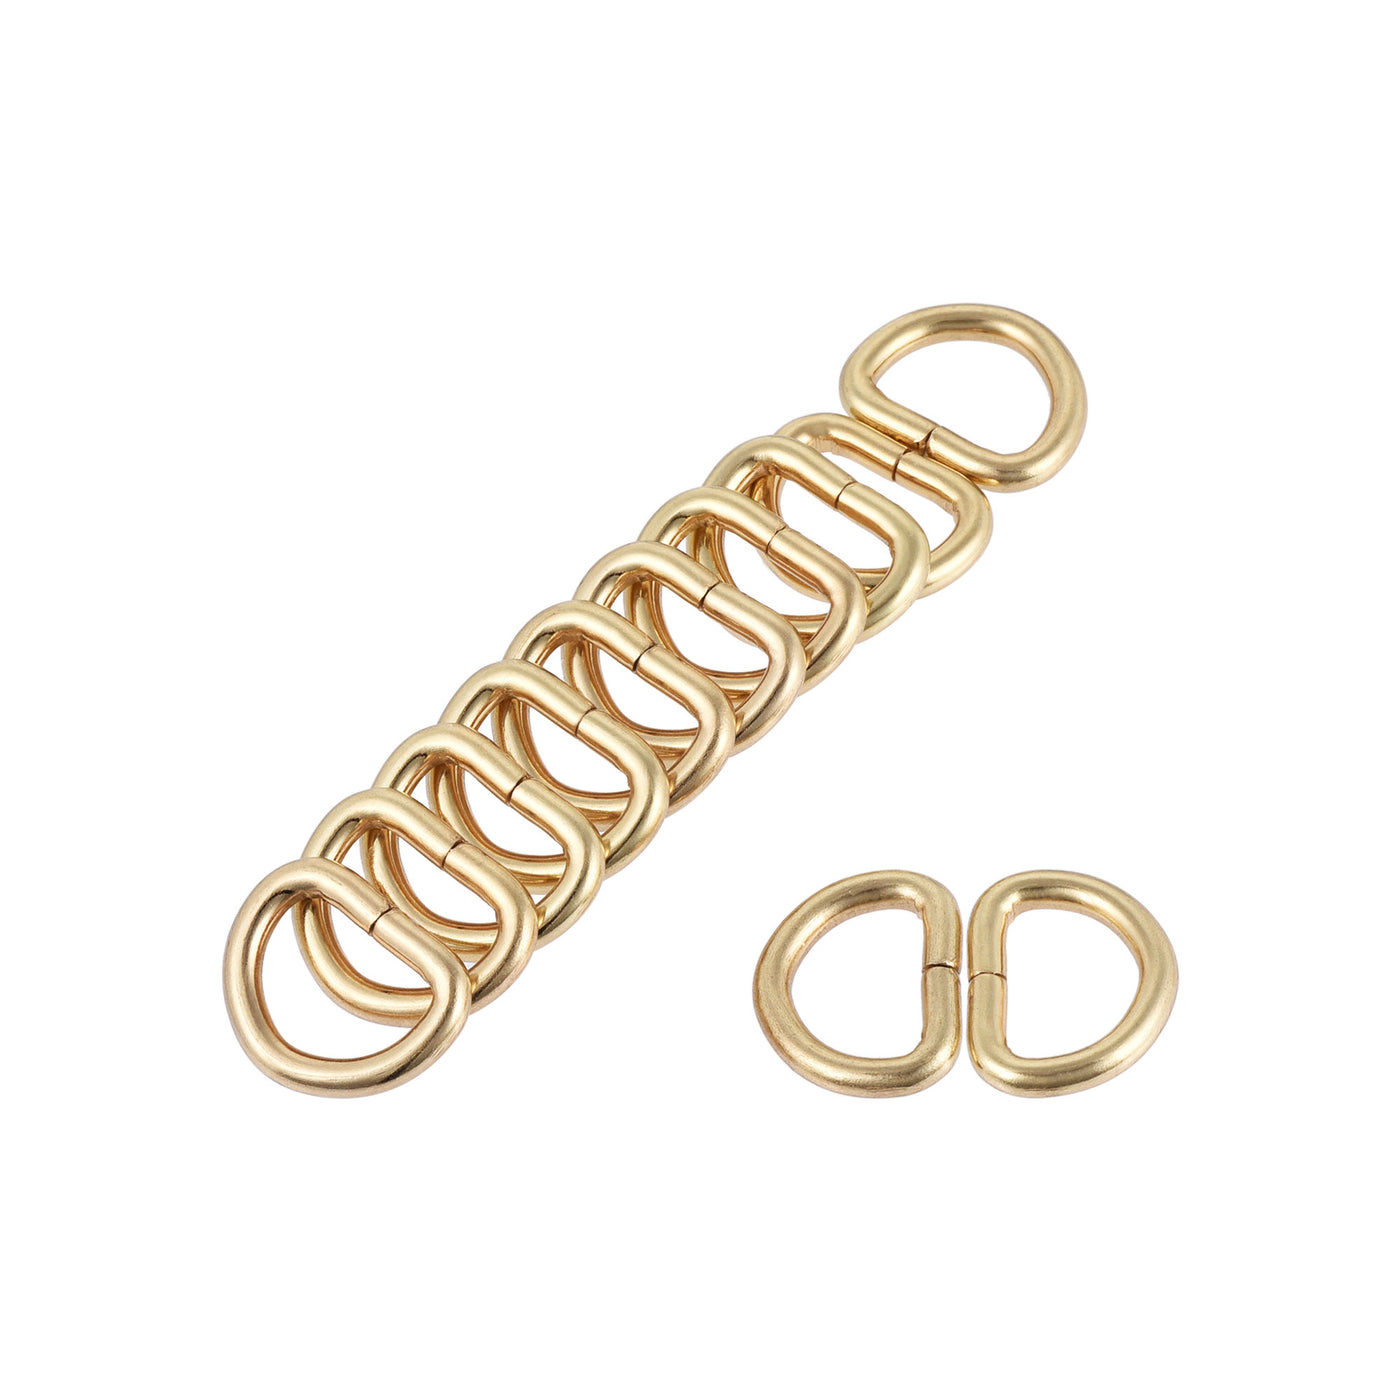 uxcell Uxcell Metal D Ring 0.51"(13mm) D-Rings Buckle for Hardware Bags Belts Craft DIY Accessories Gold Tone 100pcs